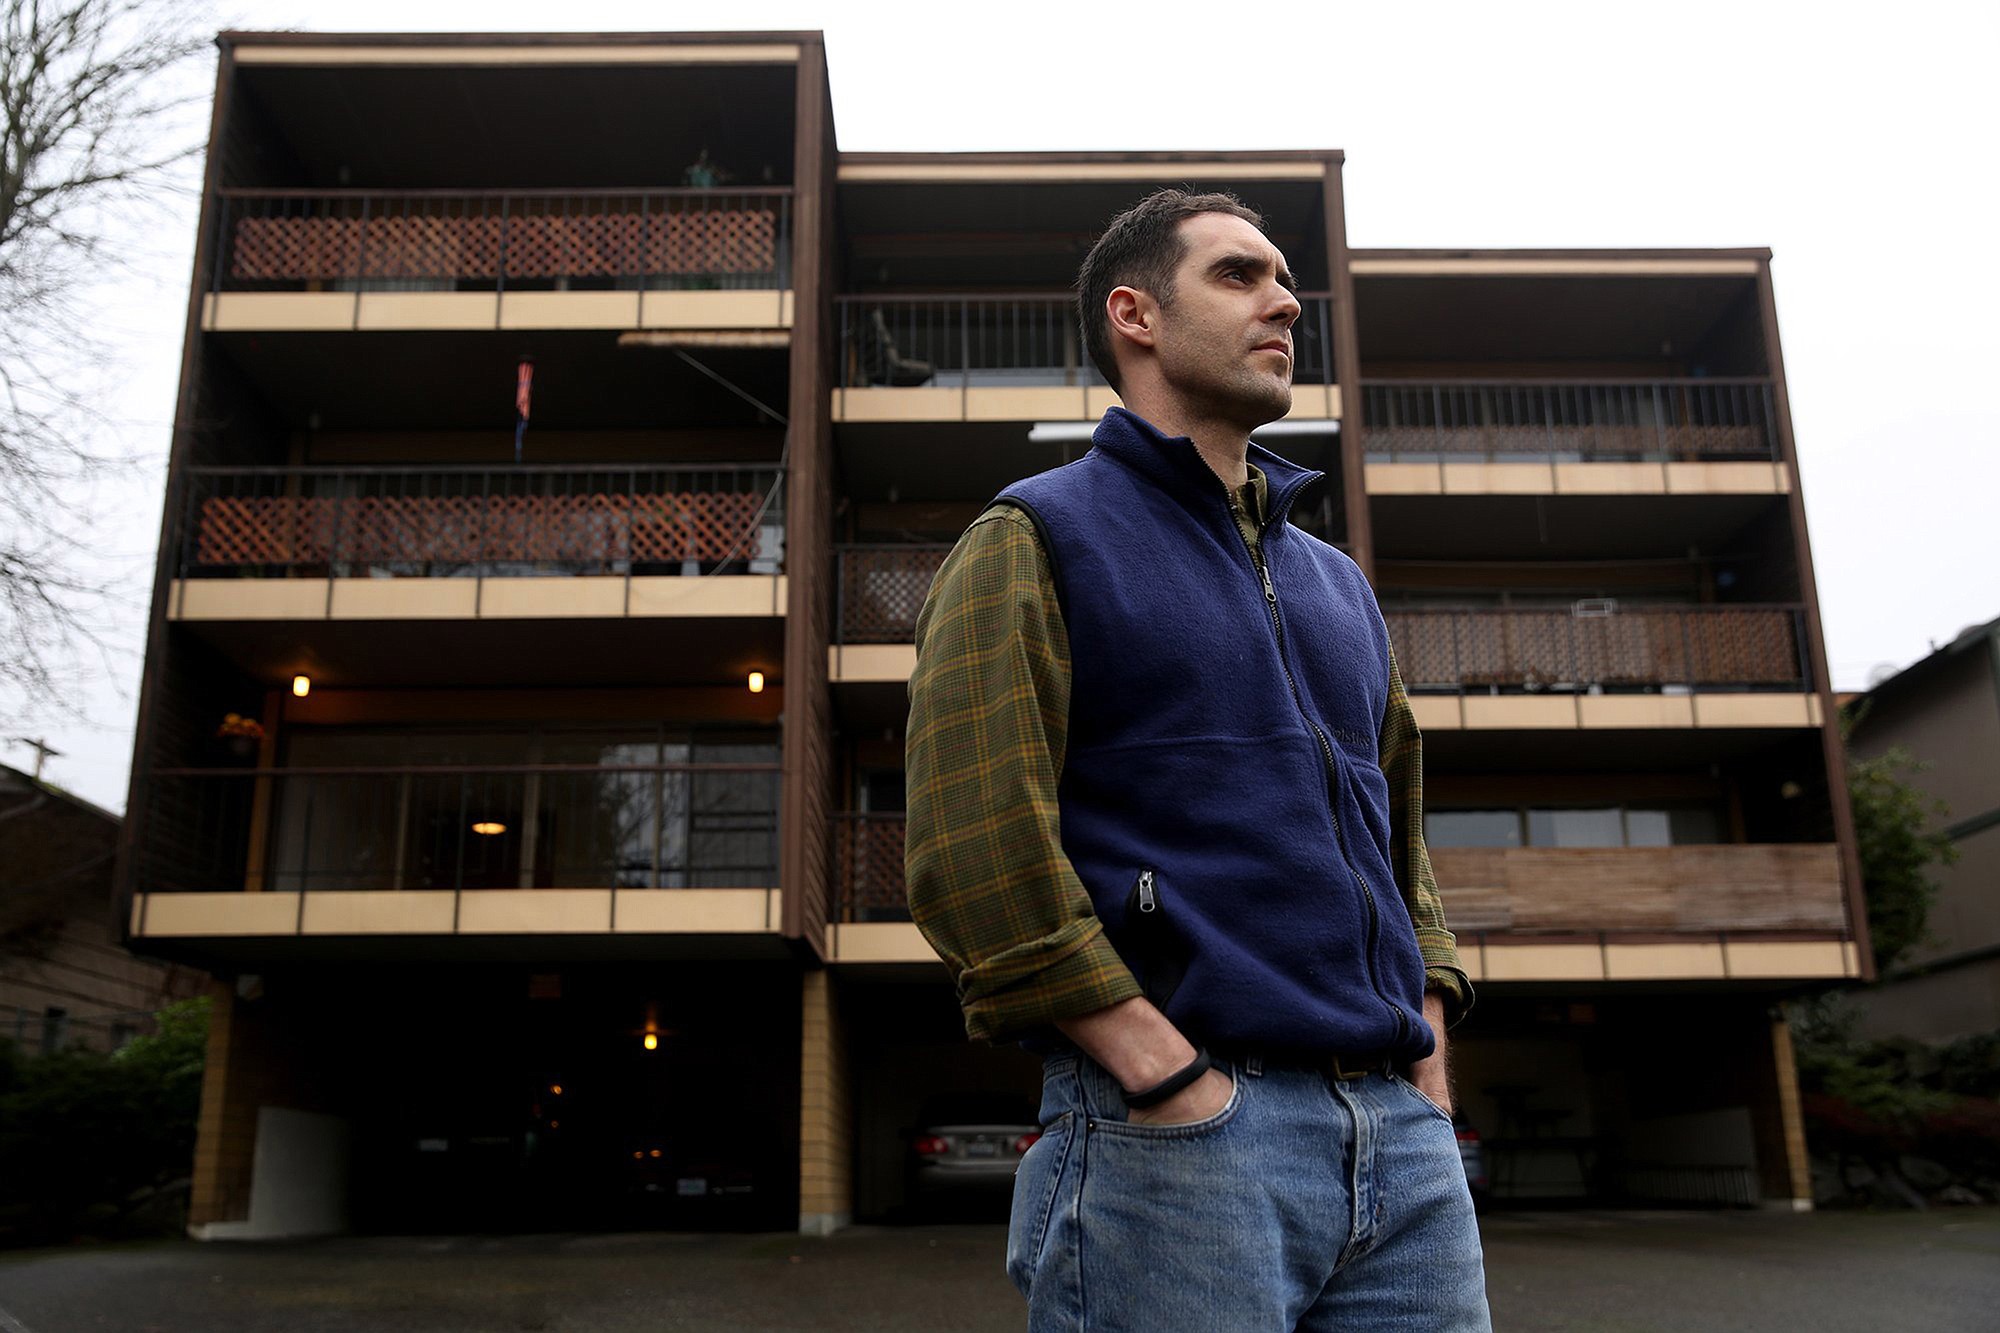 Brian Mandell, a resident at the Linda Manor Apartments in West Seattle, said he was told his one-bedroom rent would increase from $1,250 to $1,950.